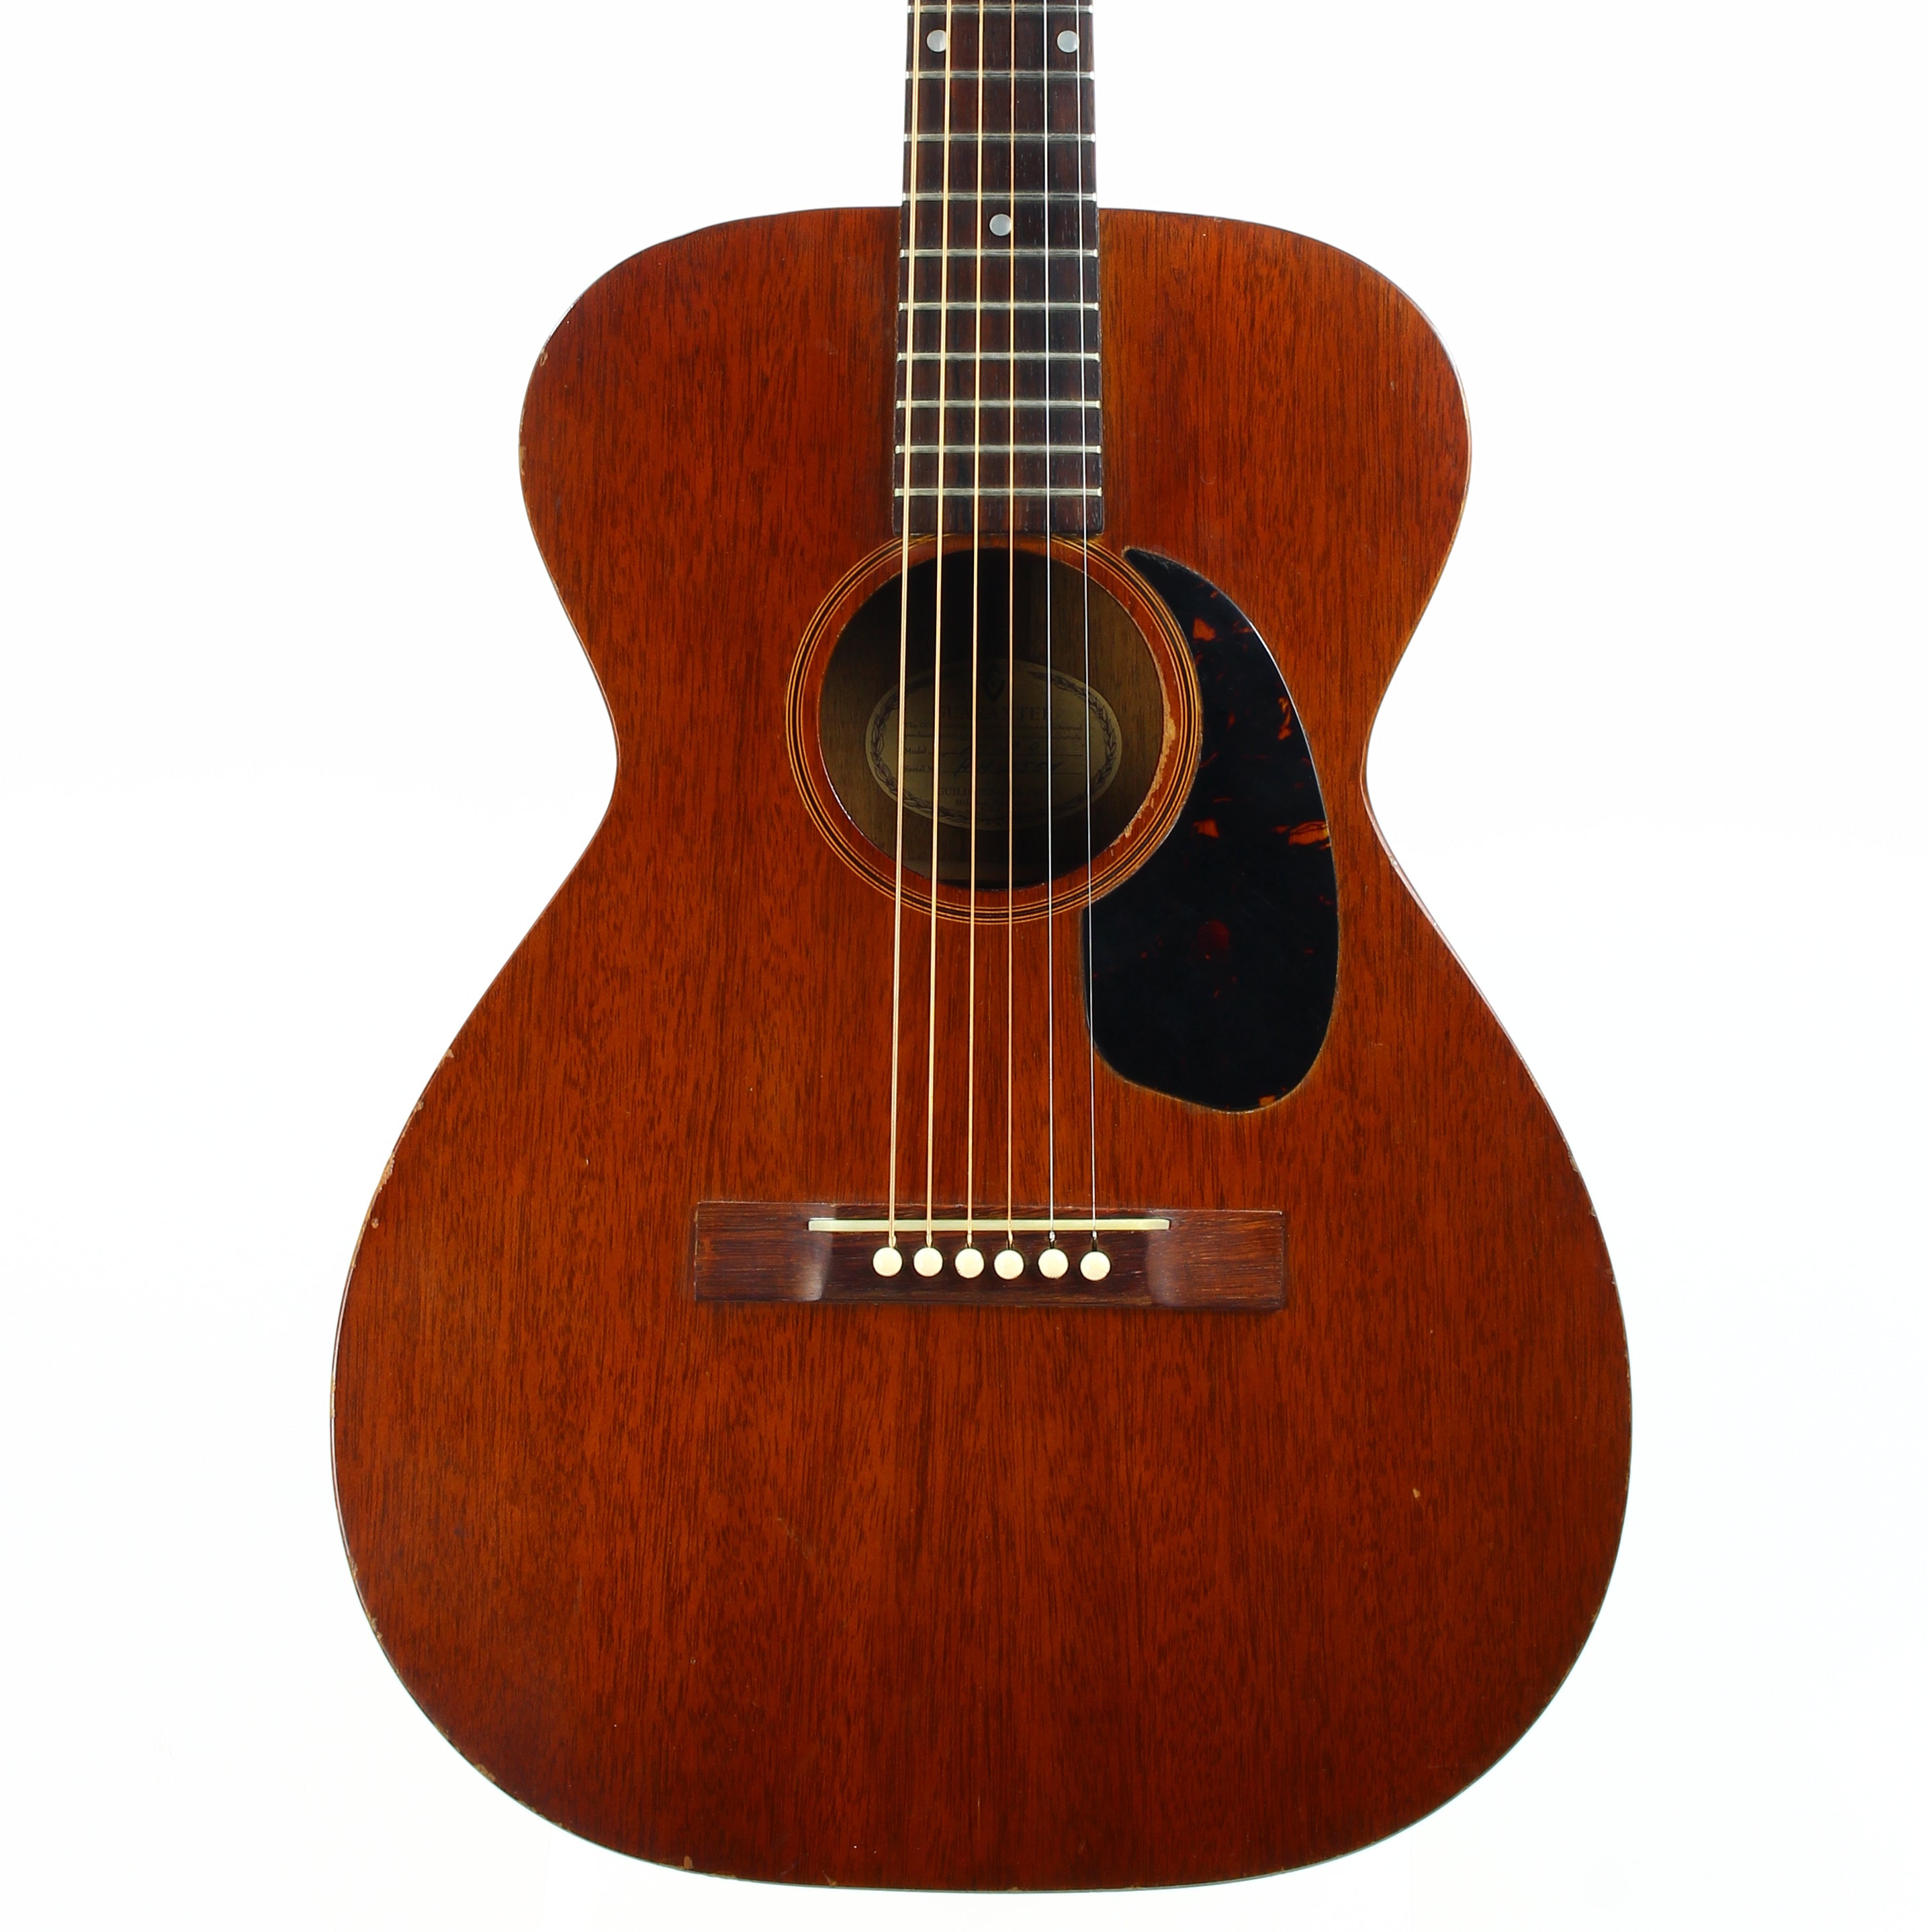 *SOLD*  c. 1965 Guild M-20 Mahogany Nick Drake Flattop Acoustic Guitar - Vintage 1960's Small Body